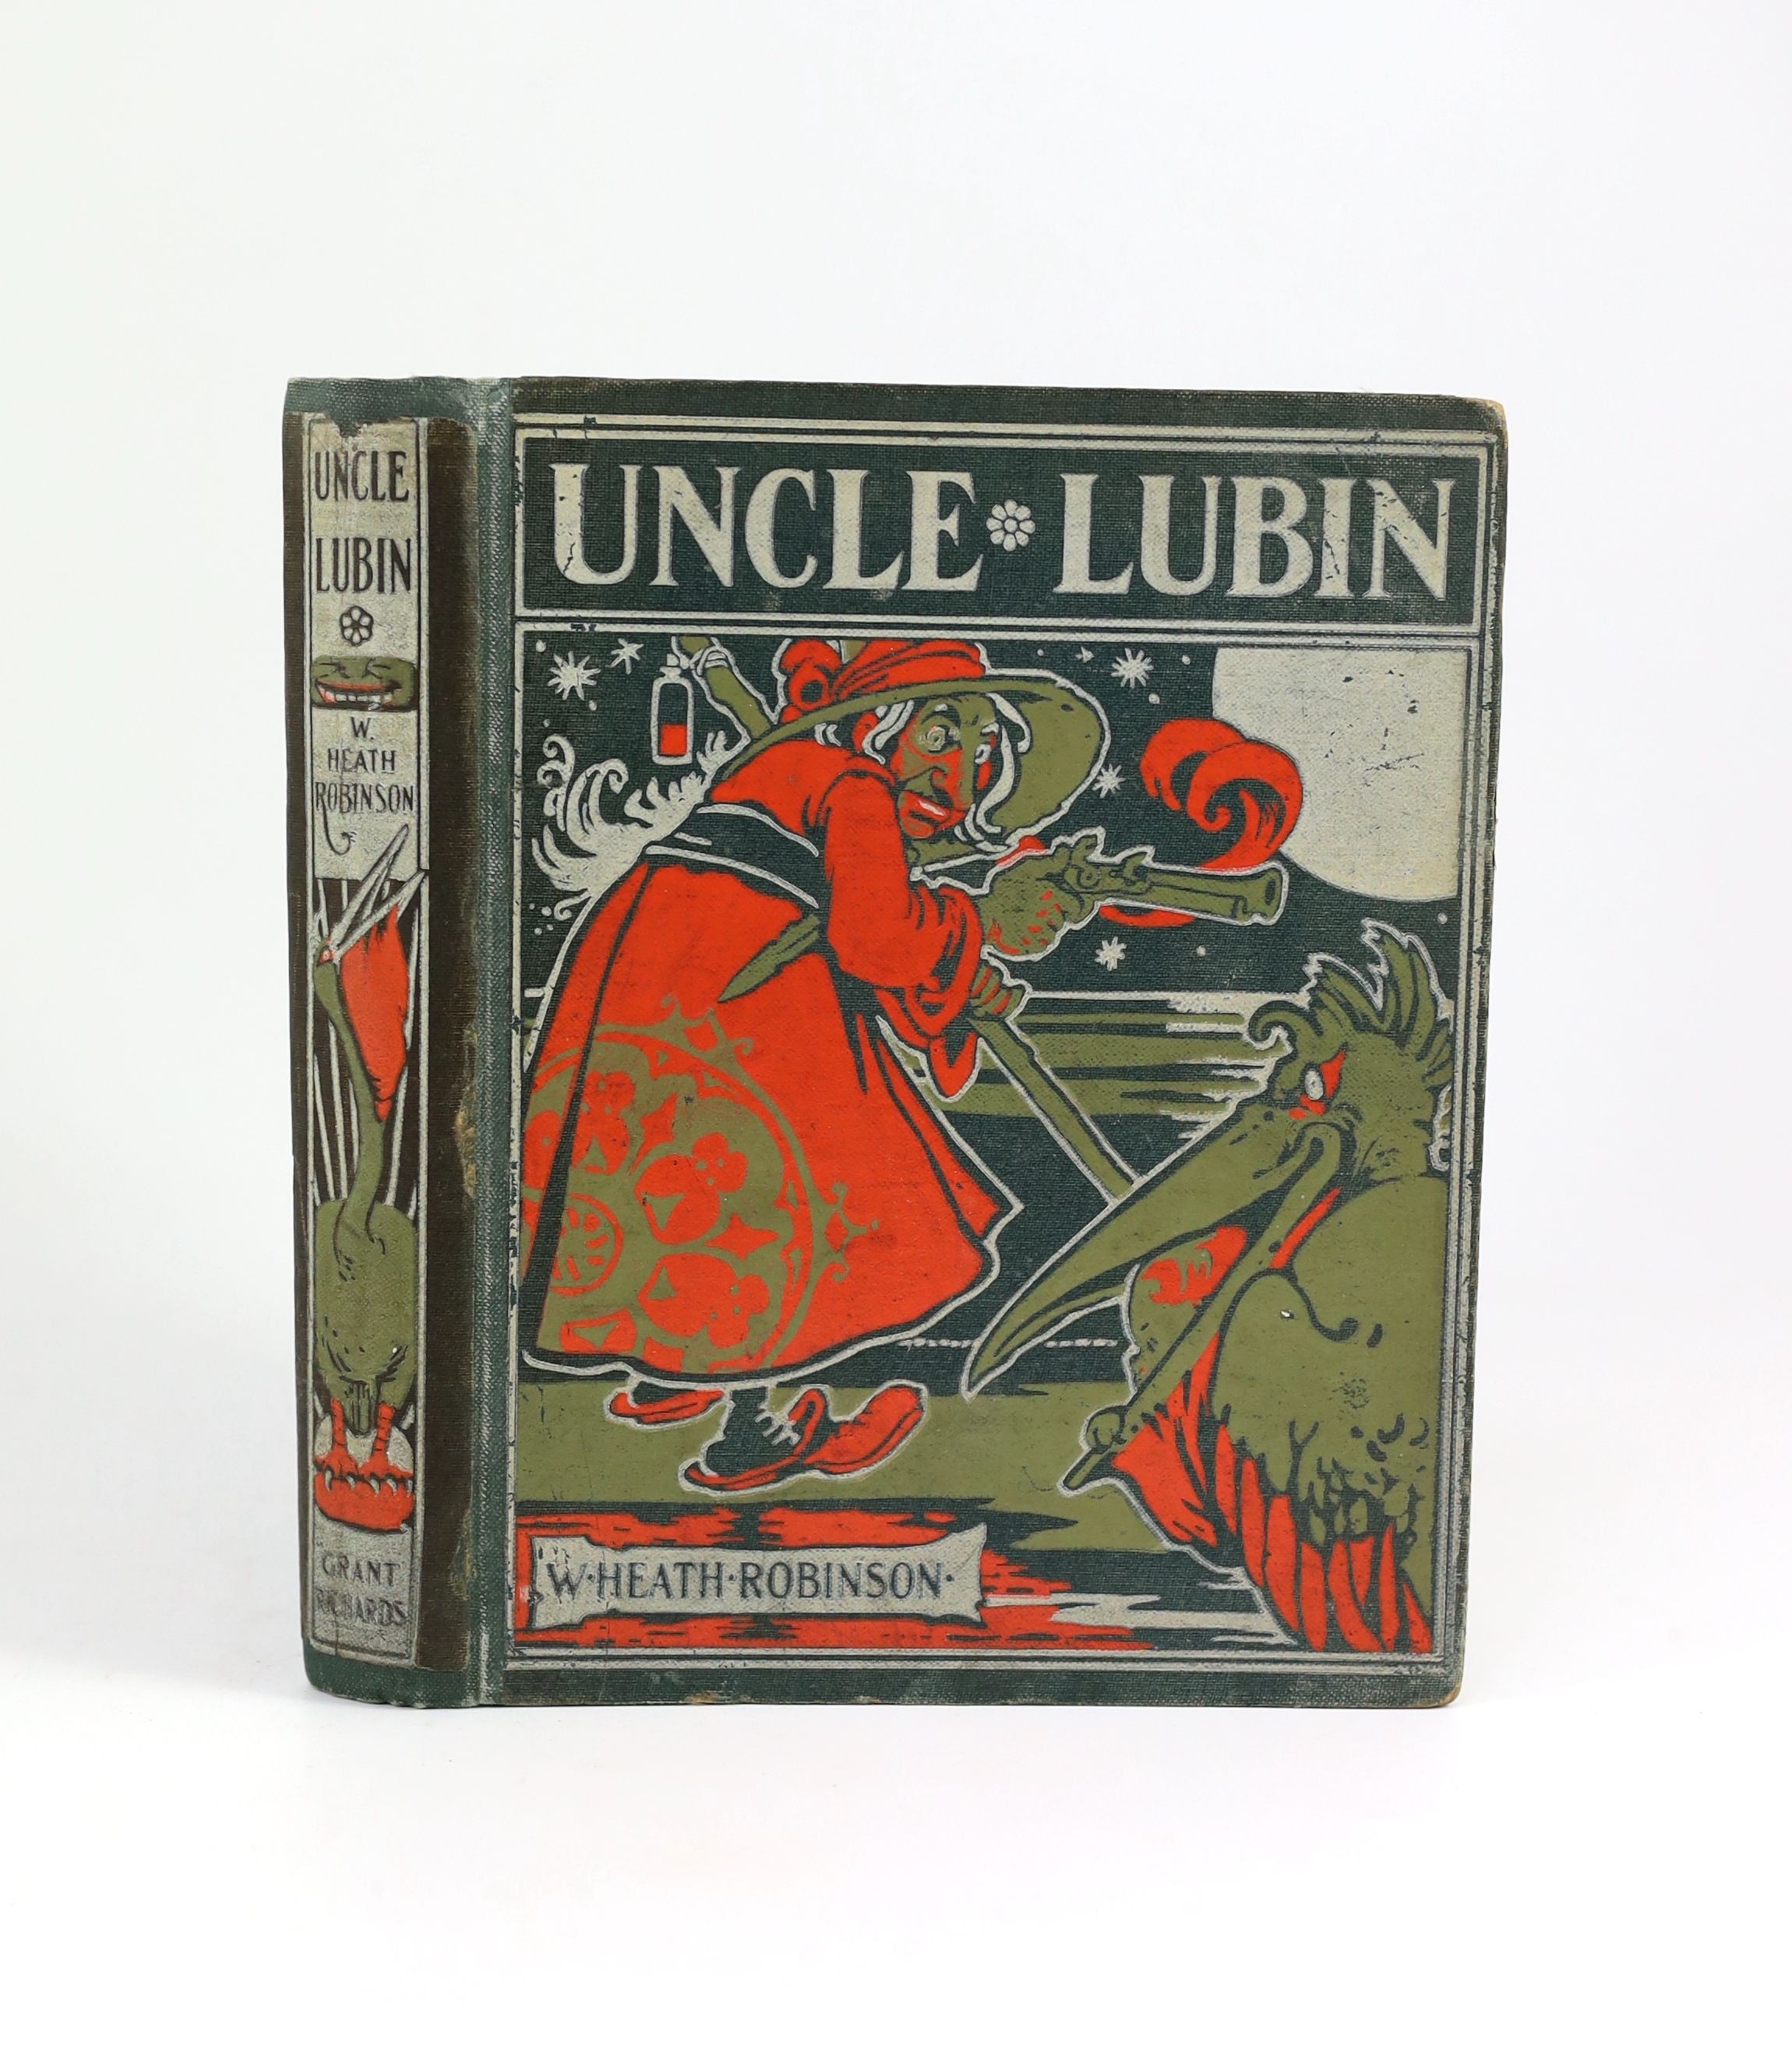 Robinson, W. Heath - The Adventures of Uncle Lubin, 1st edition, 4to, original pictorial cloth, with frontis and 40 plates, Grant Richards, London, 1902